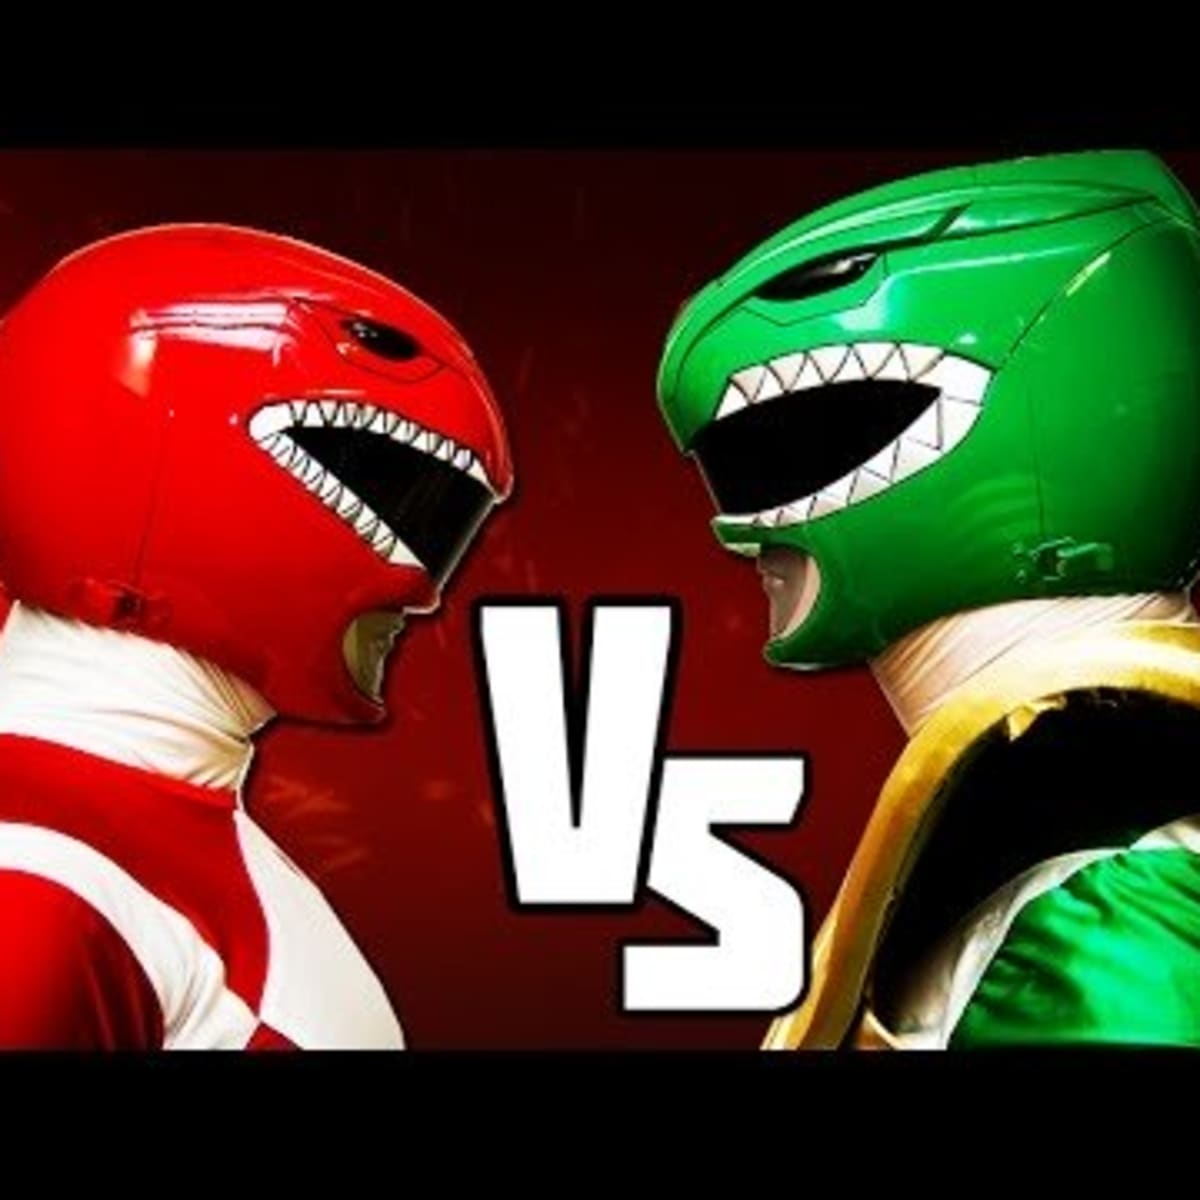 6 Reasons The Red Ranger Jason Is Stronger Than The Green Tommy Reelrundown